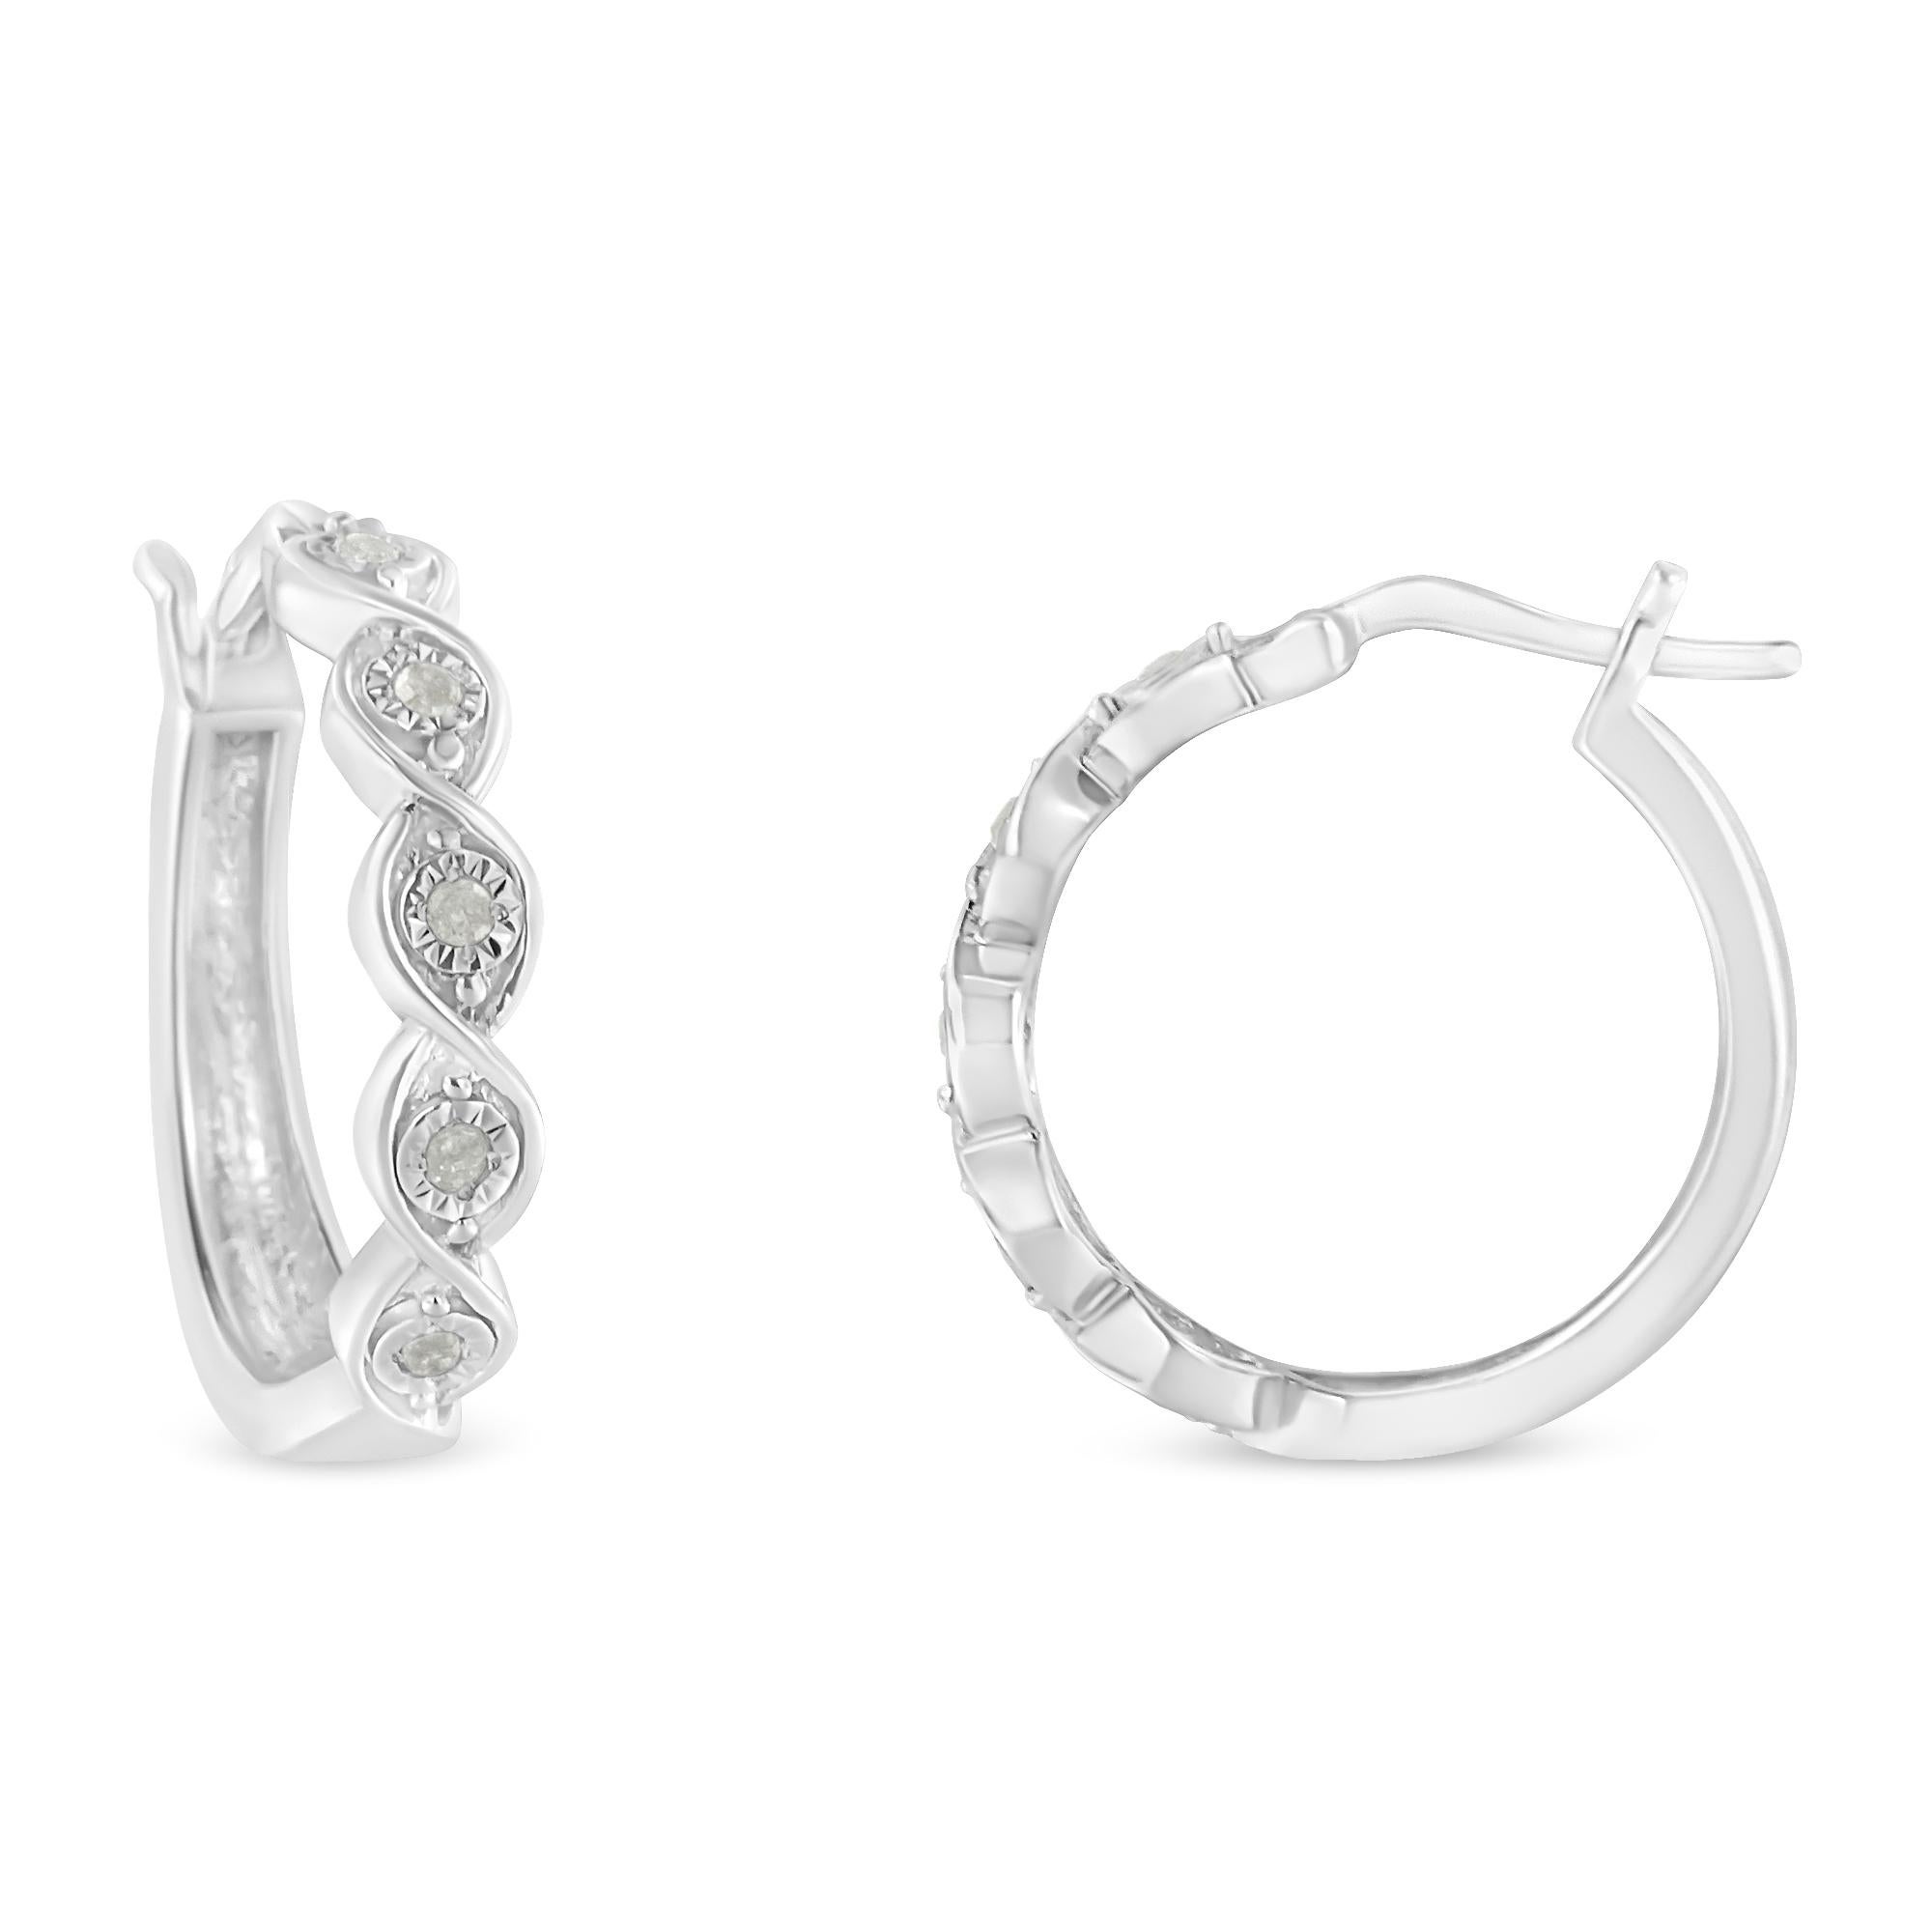 Beautiful hoop earrings made the finest .925 sterling silver and genuine diamonds with a miracle setting. They present an intertwined layer structure, where 10 rose-cut diamonds fill out the middle of each junction. There’s another layer made of